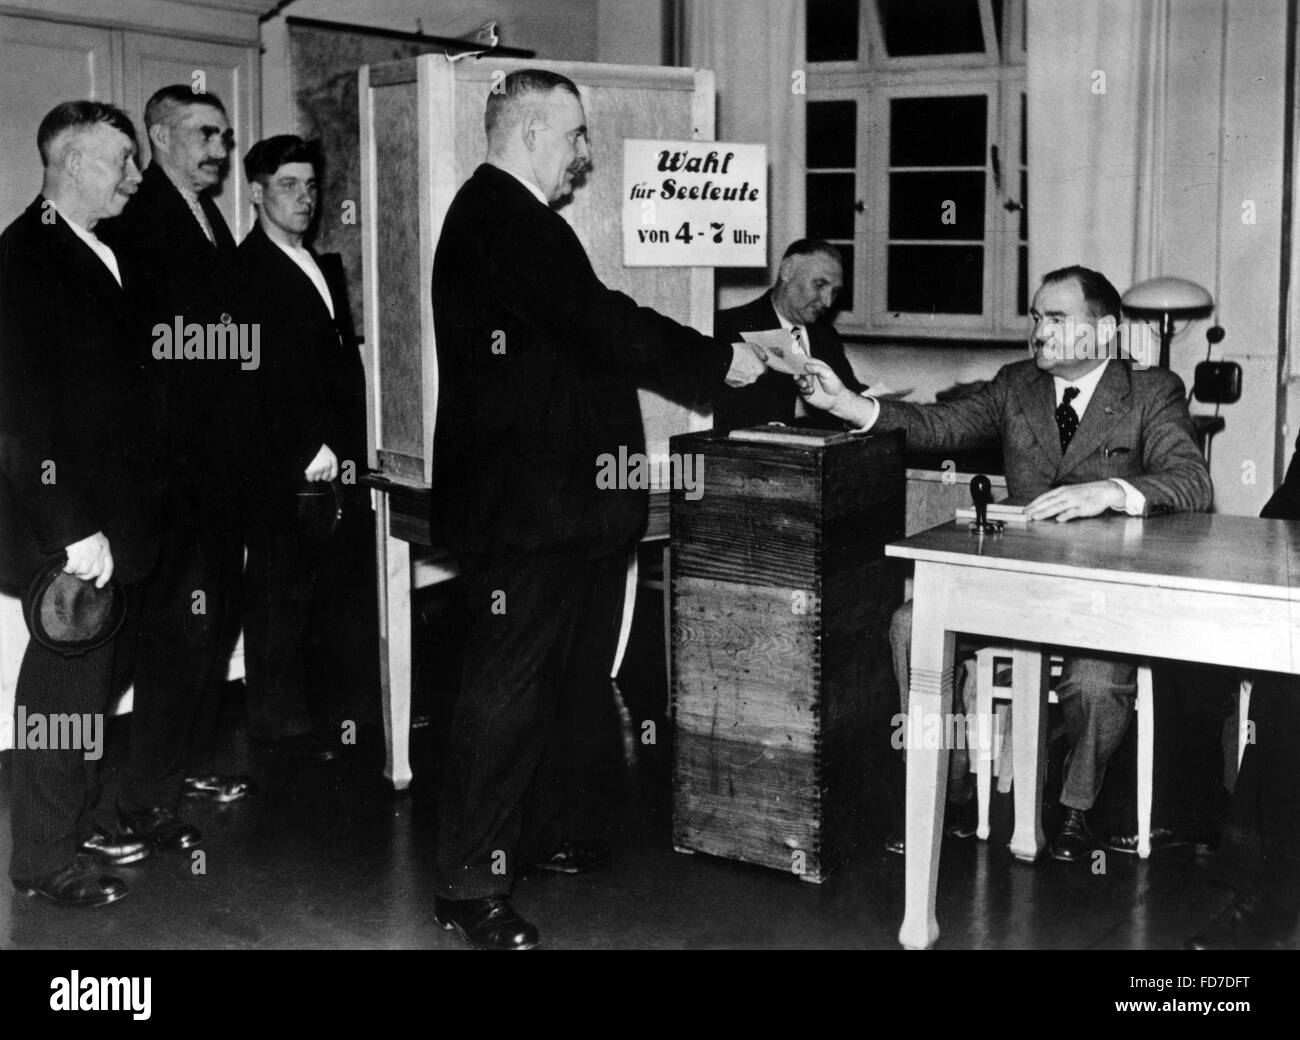 Hamburg polling station of seafarers for the referendum on the head of state of the German Reich, 1934 Stock Photo